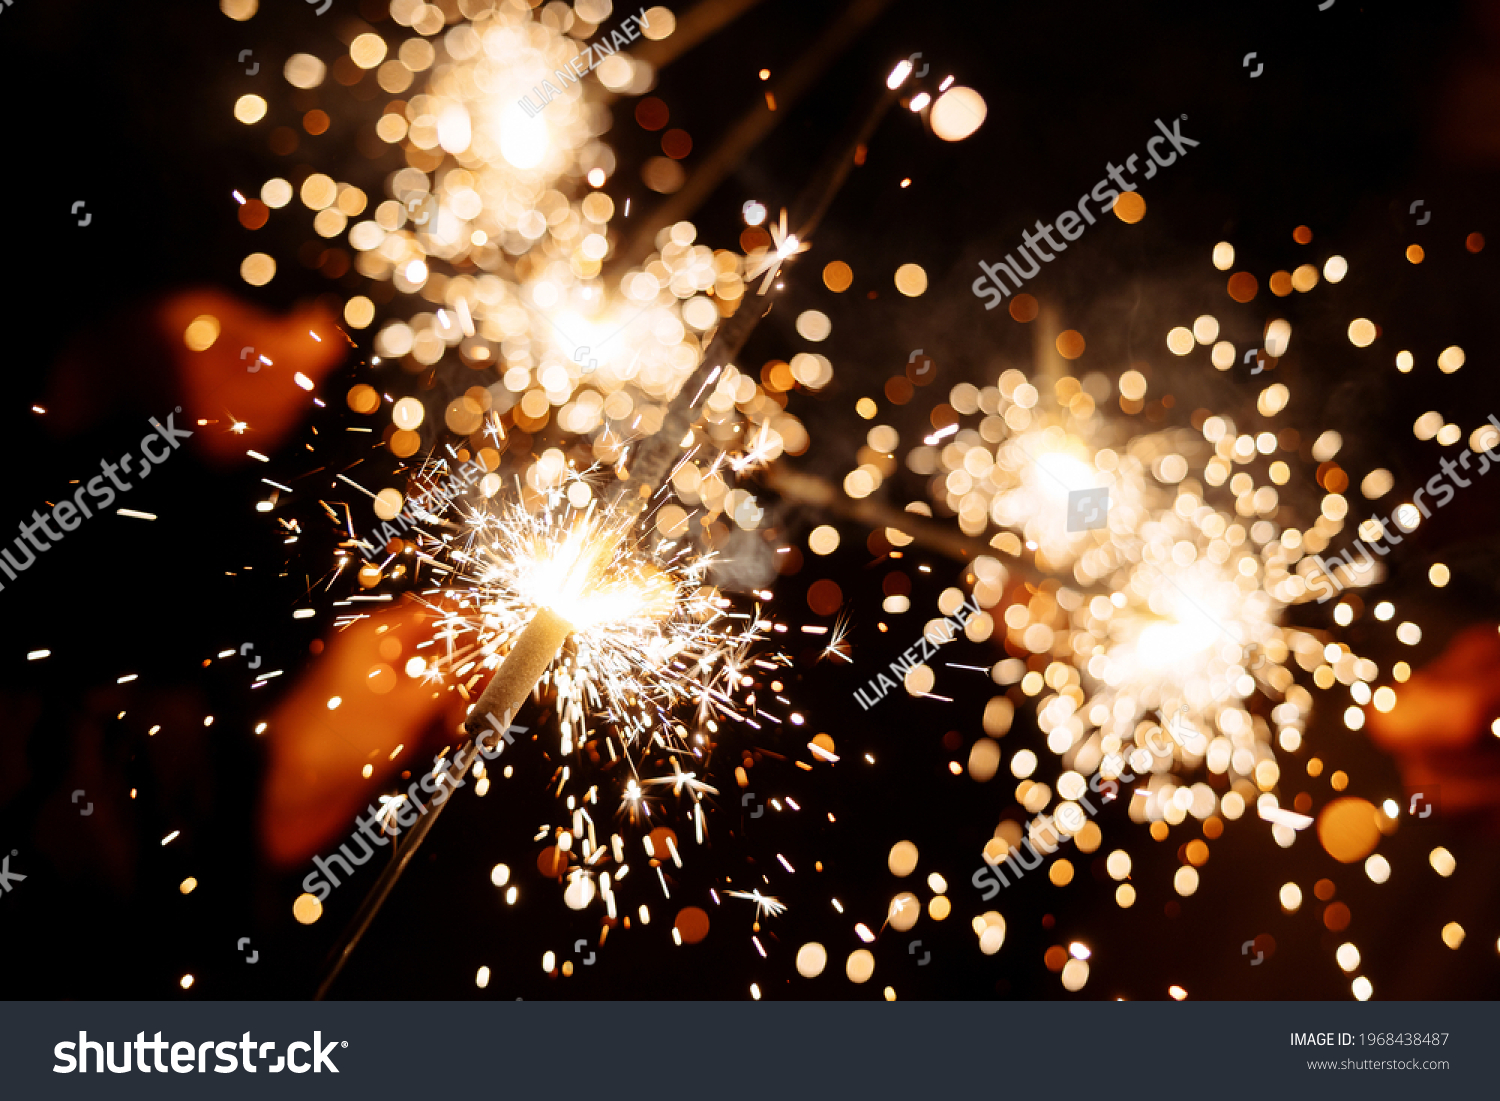 Burning fireworks and sparklers. Sparks and glare from fire flares. bengal lights #1968438487